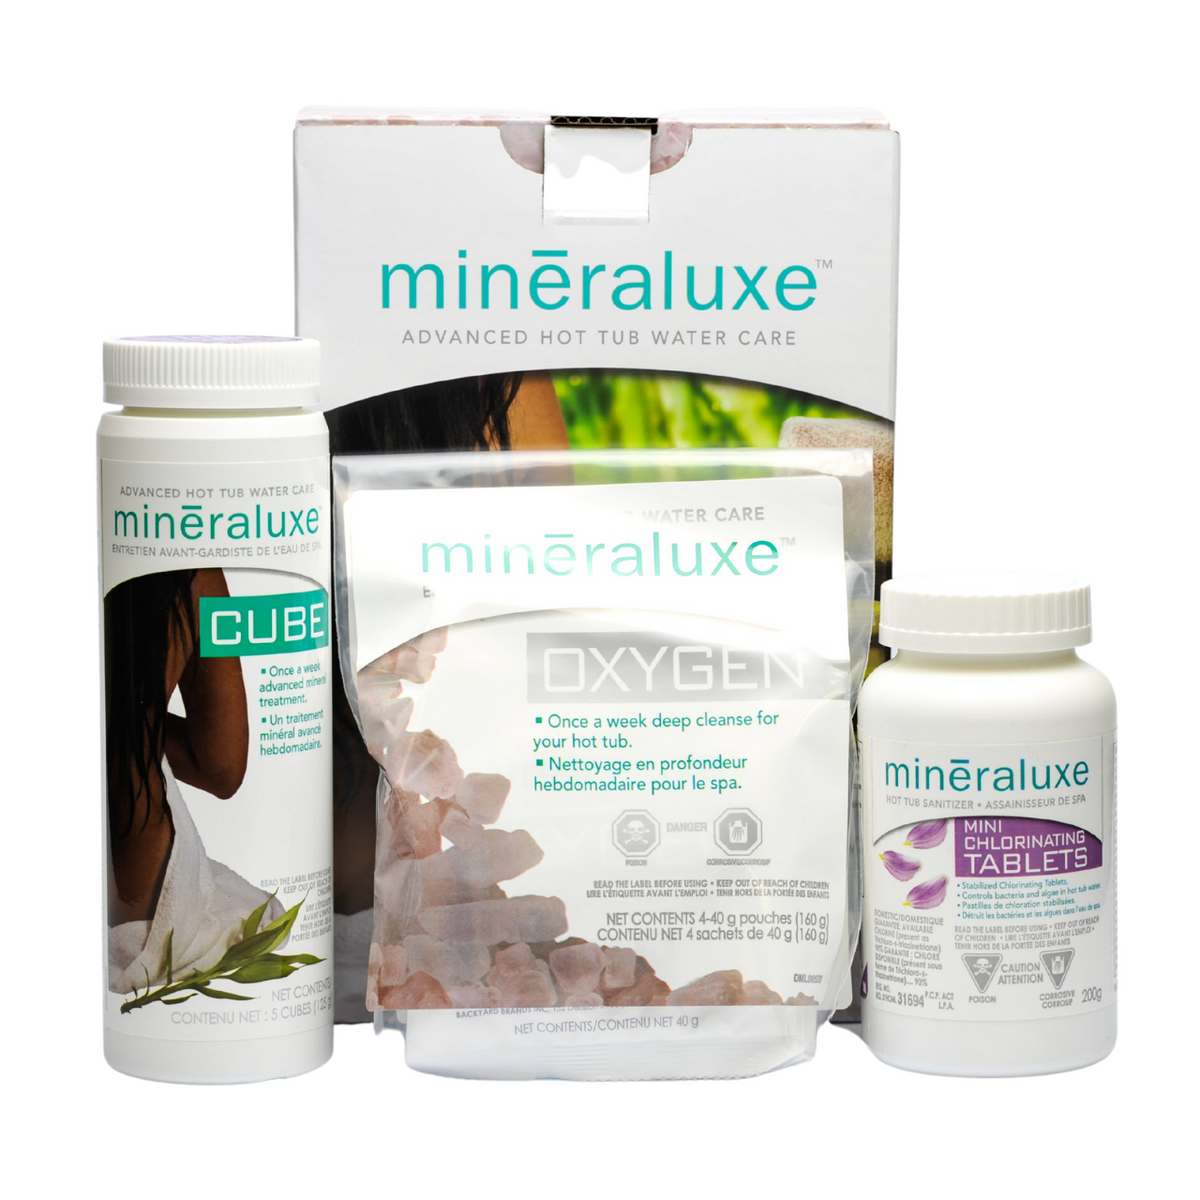 Mineraluxe™ 1 Month Chlorine Tablet Mineraluxe System